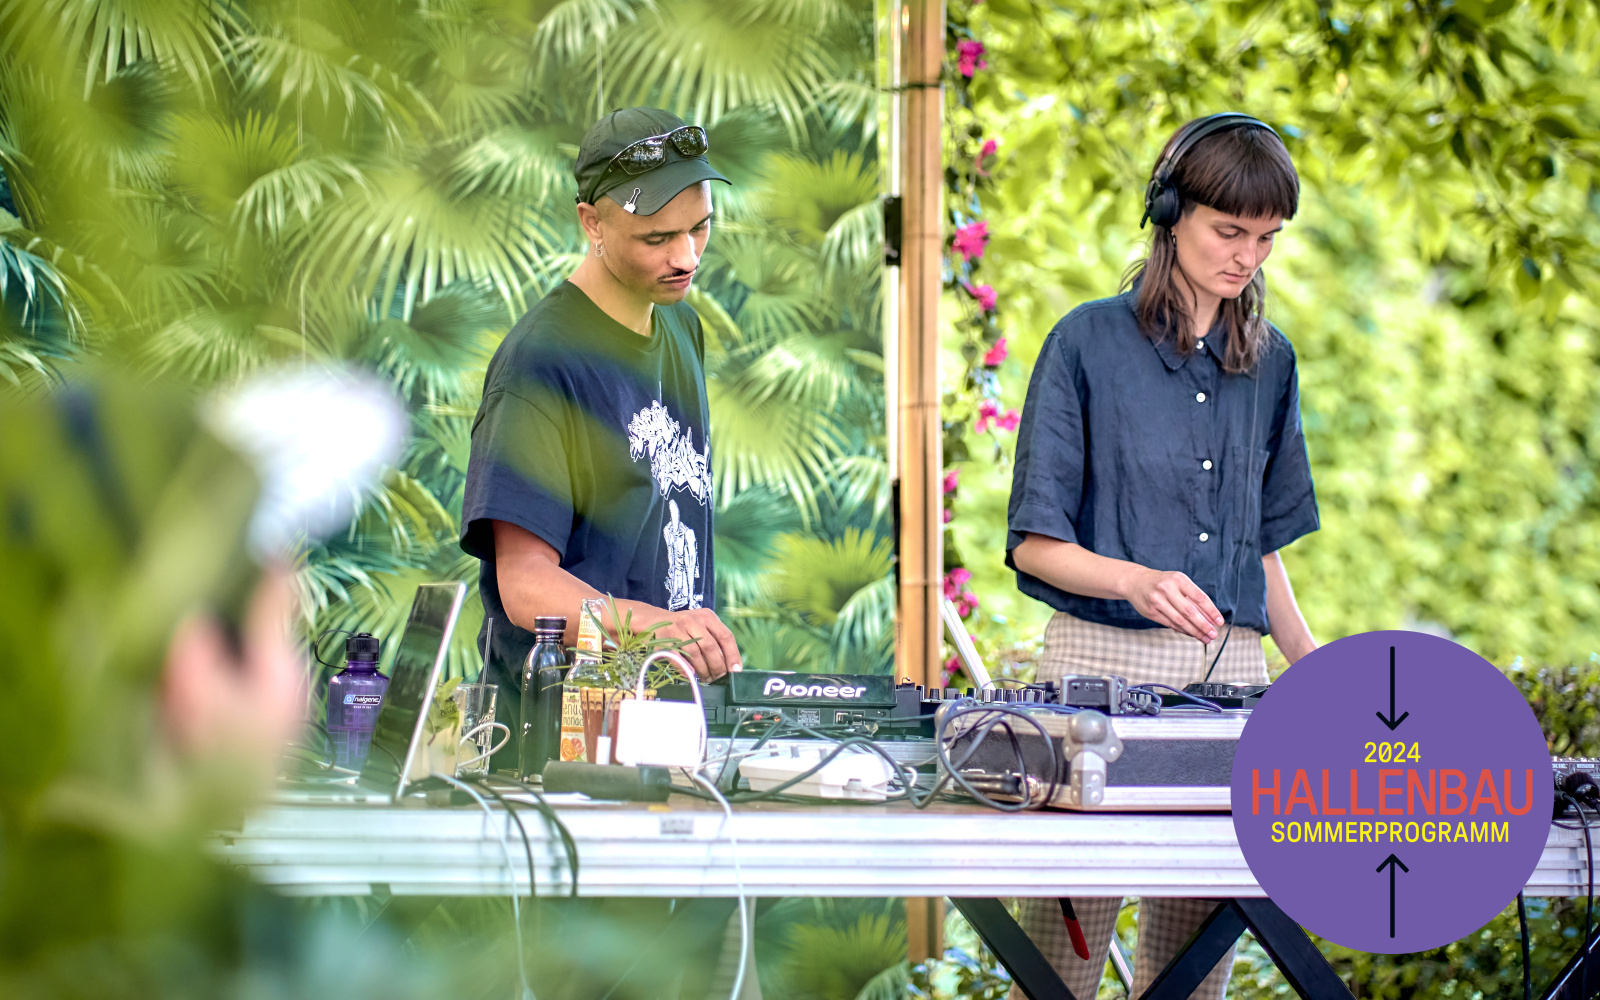 A DJ and a DJane are standing outside at a mixing desk, with lots of greenery in the background.